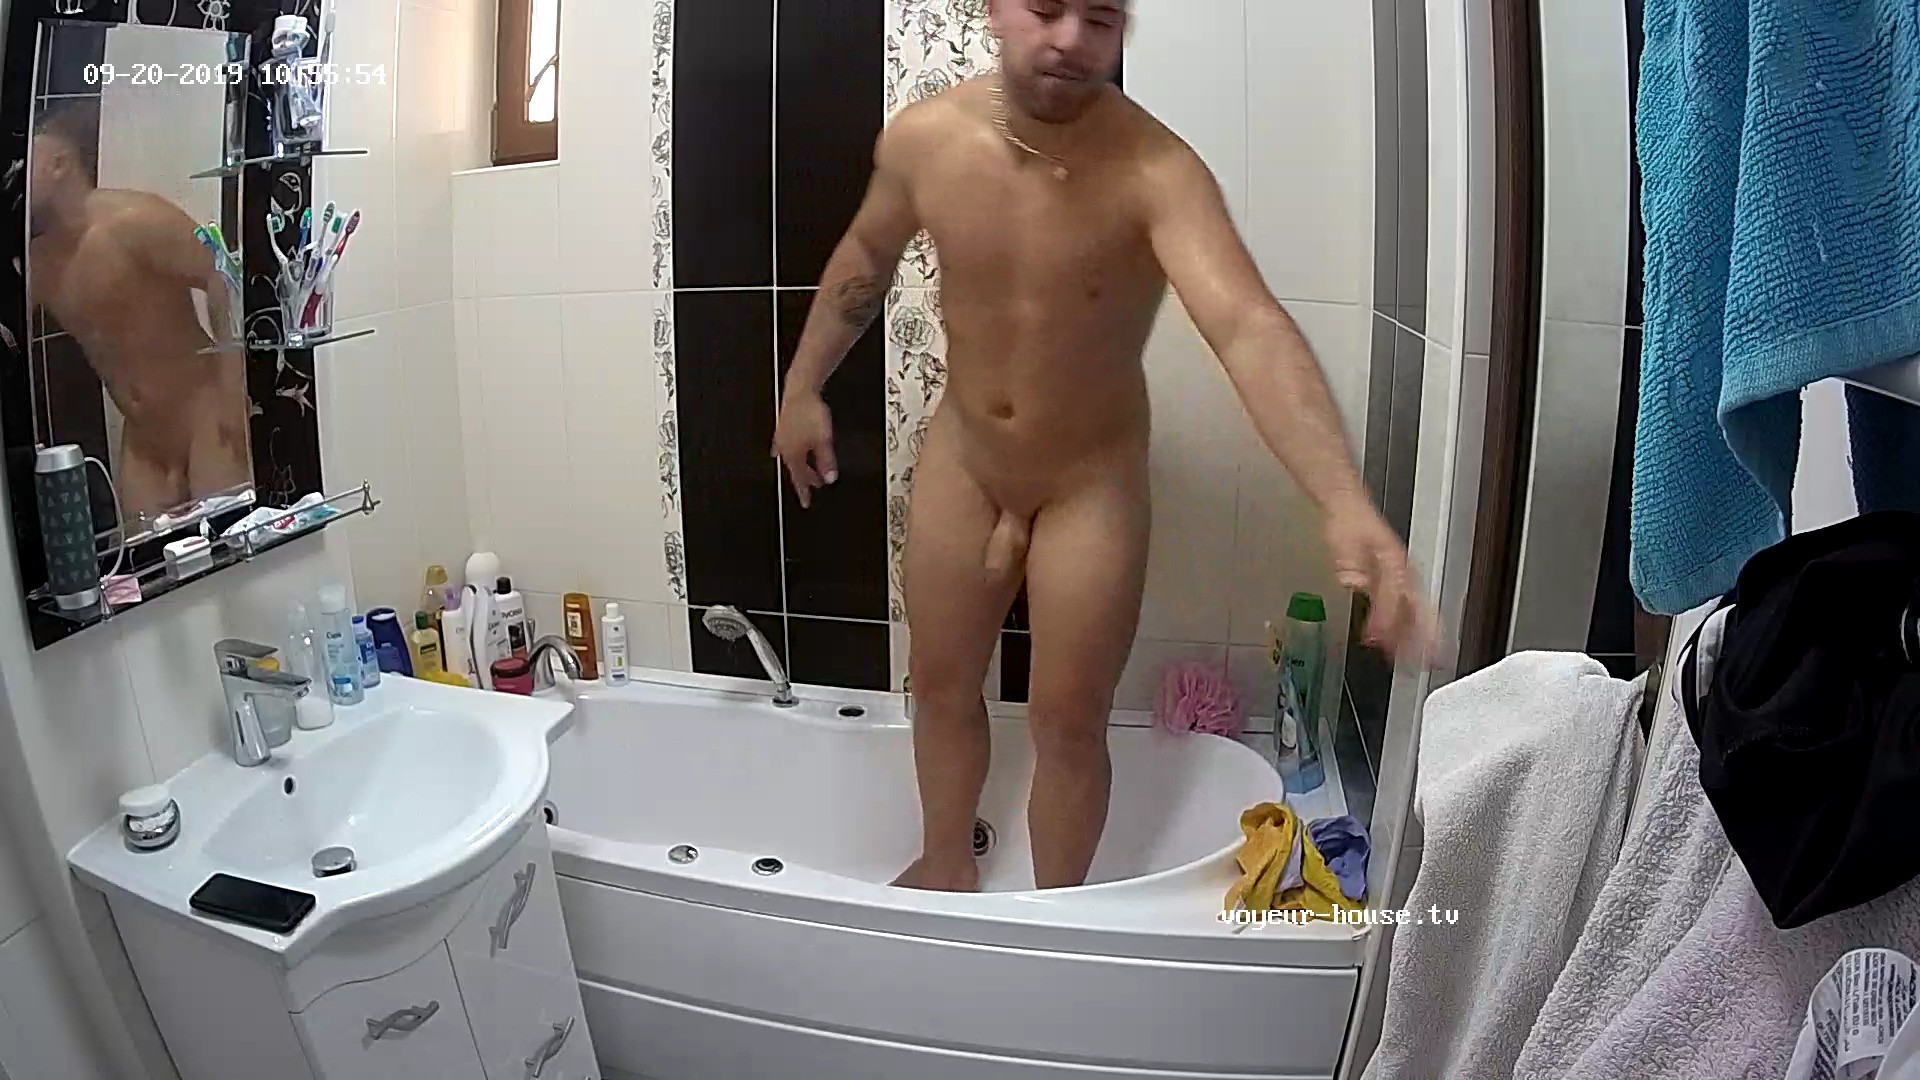 Guest Guy Shower 20 Sep 2019